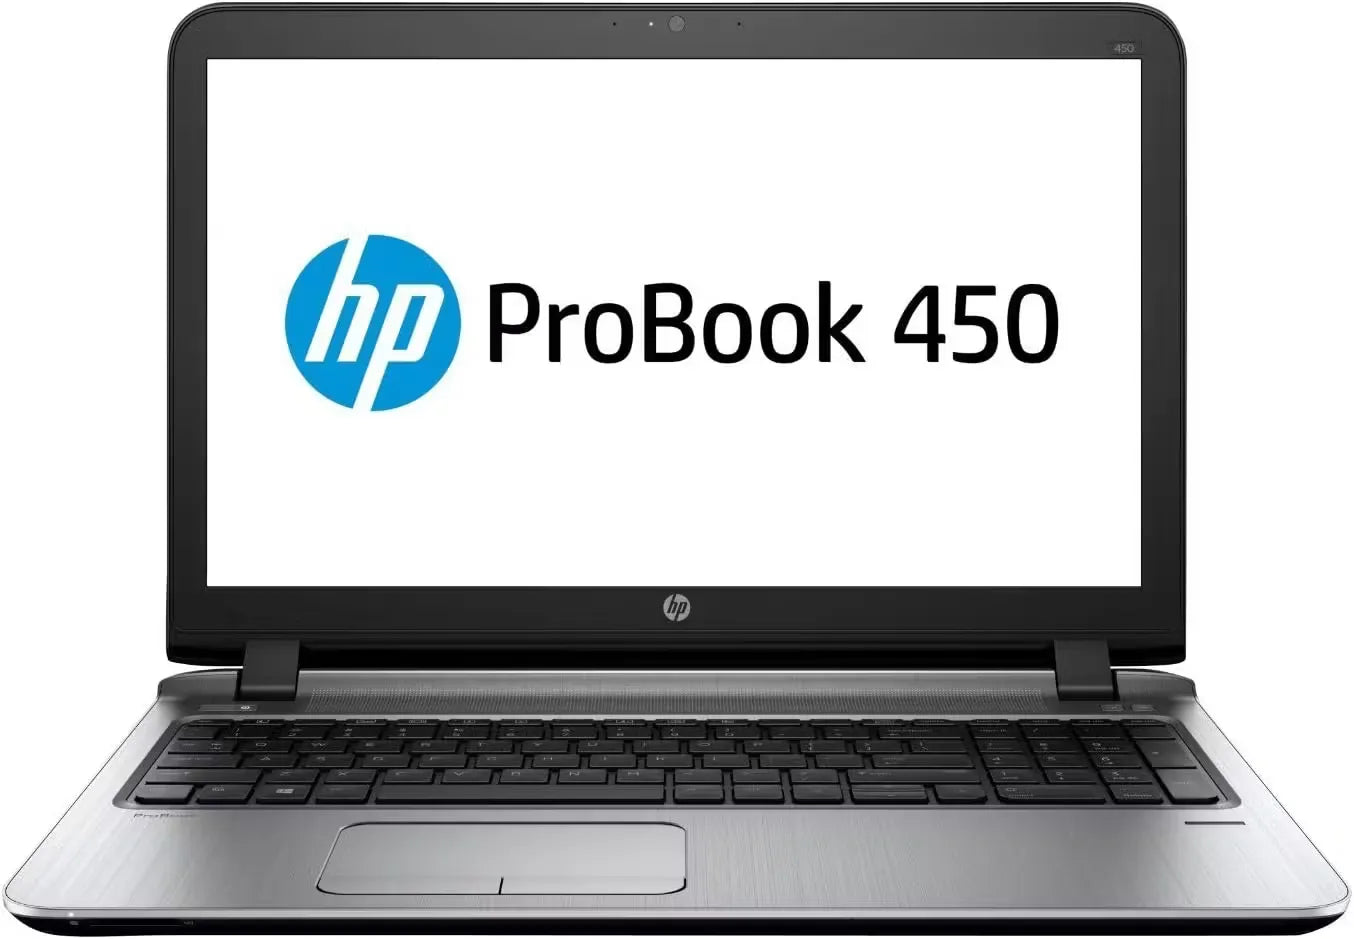 HP ProBook 450 G3: 15.6" thin & light laptop with Intel Core i3, 256GB SSD & 4GB RAM.  Business-ready ProBook 450 G3: Powerful performance for work & everyday tasks.  Stay productive on the go with the portable HP ProBook 450 G3 laptop. 15.6" Full HD display, Intel Core i3 processor, 256GB SSD storage, 4GB RAM.  Windows 10 Pro operating system included (mention if relevant).  Ports for connecting to various devices & accessories. Upgrade your workday: Experience the HP ProBook 450 G3 laptop.